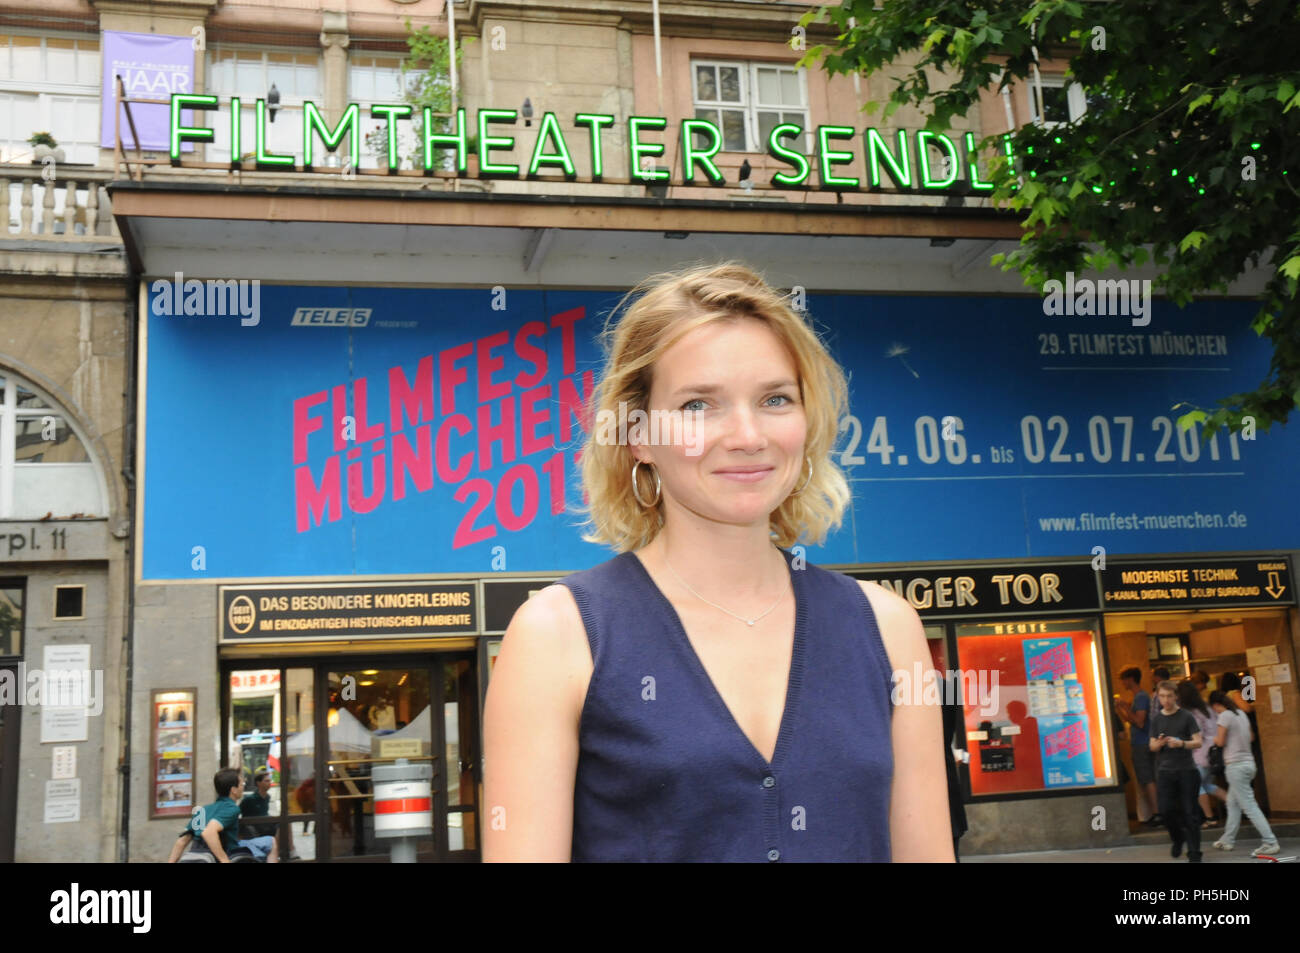 Actress Sophie Quinton seen before the screening of her Film Poupoupidou at Filmfest München 2011 Stock Photo